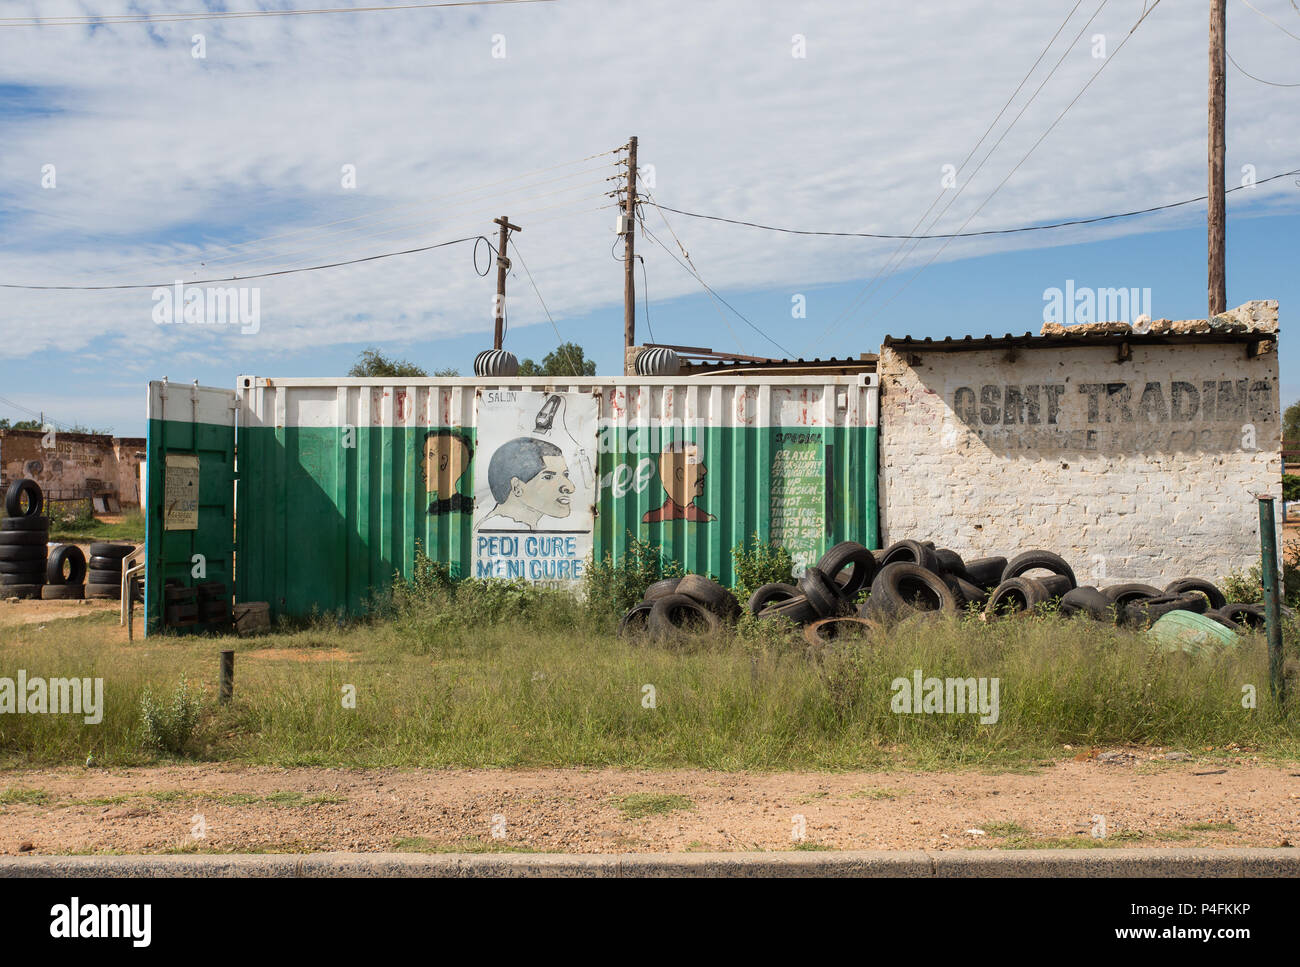 African hair salon in converted colourful metal shipping container on the side of the road in rural community of northern South Africa Stock Photo